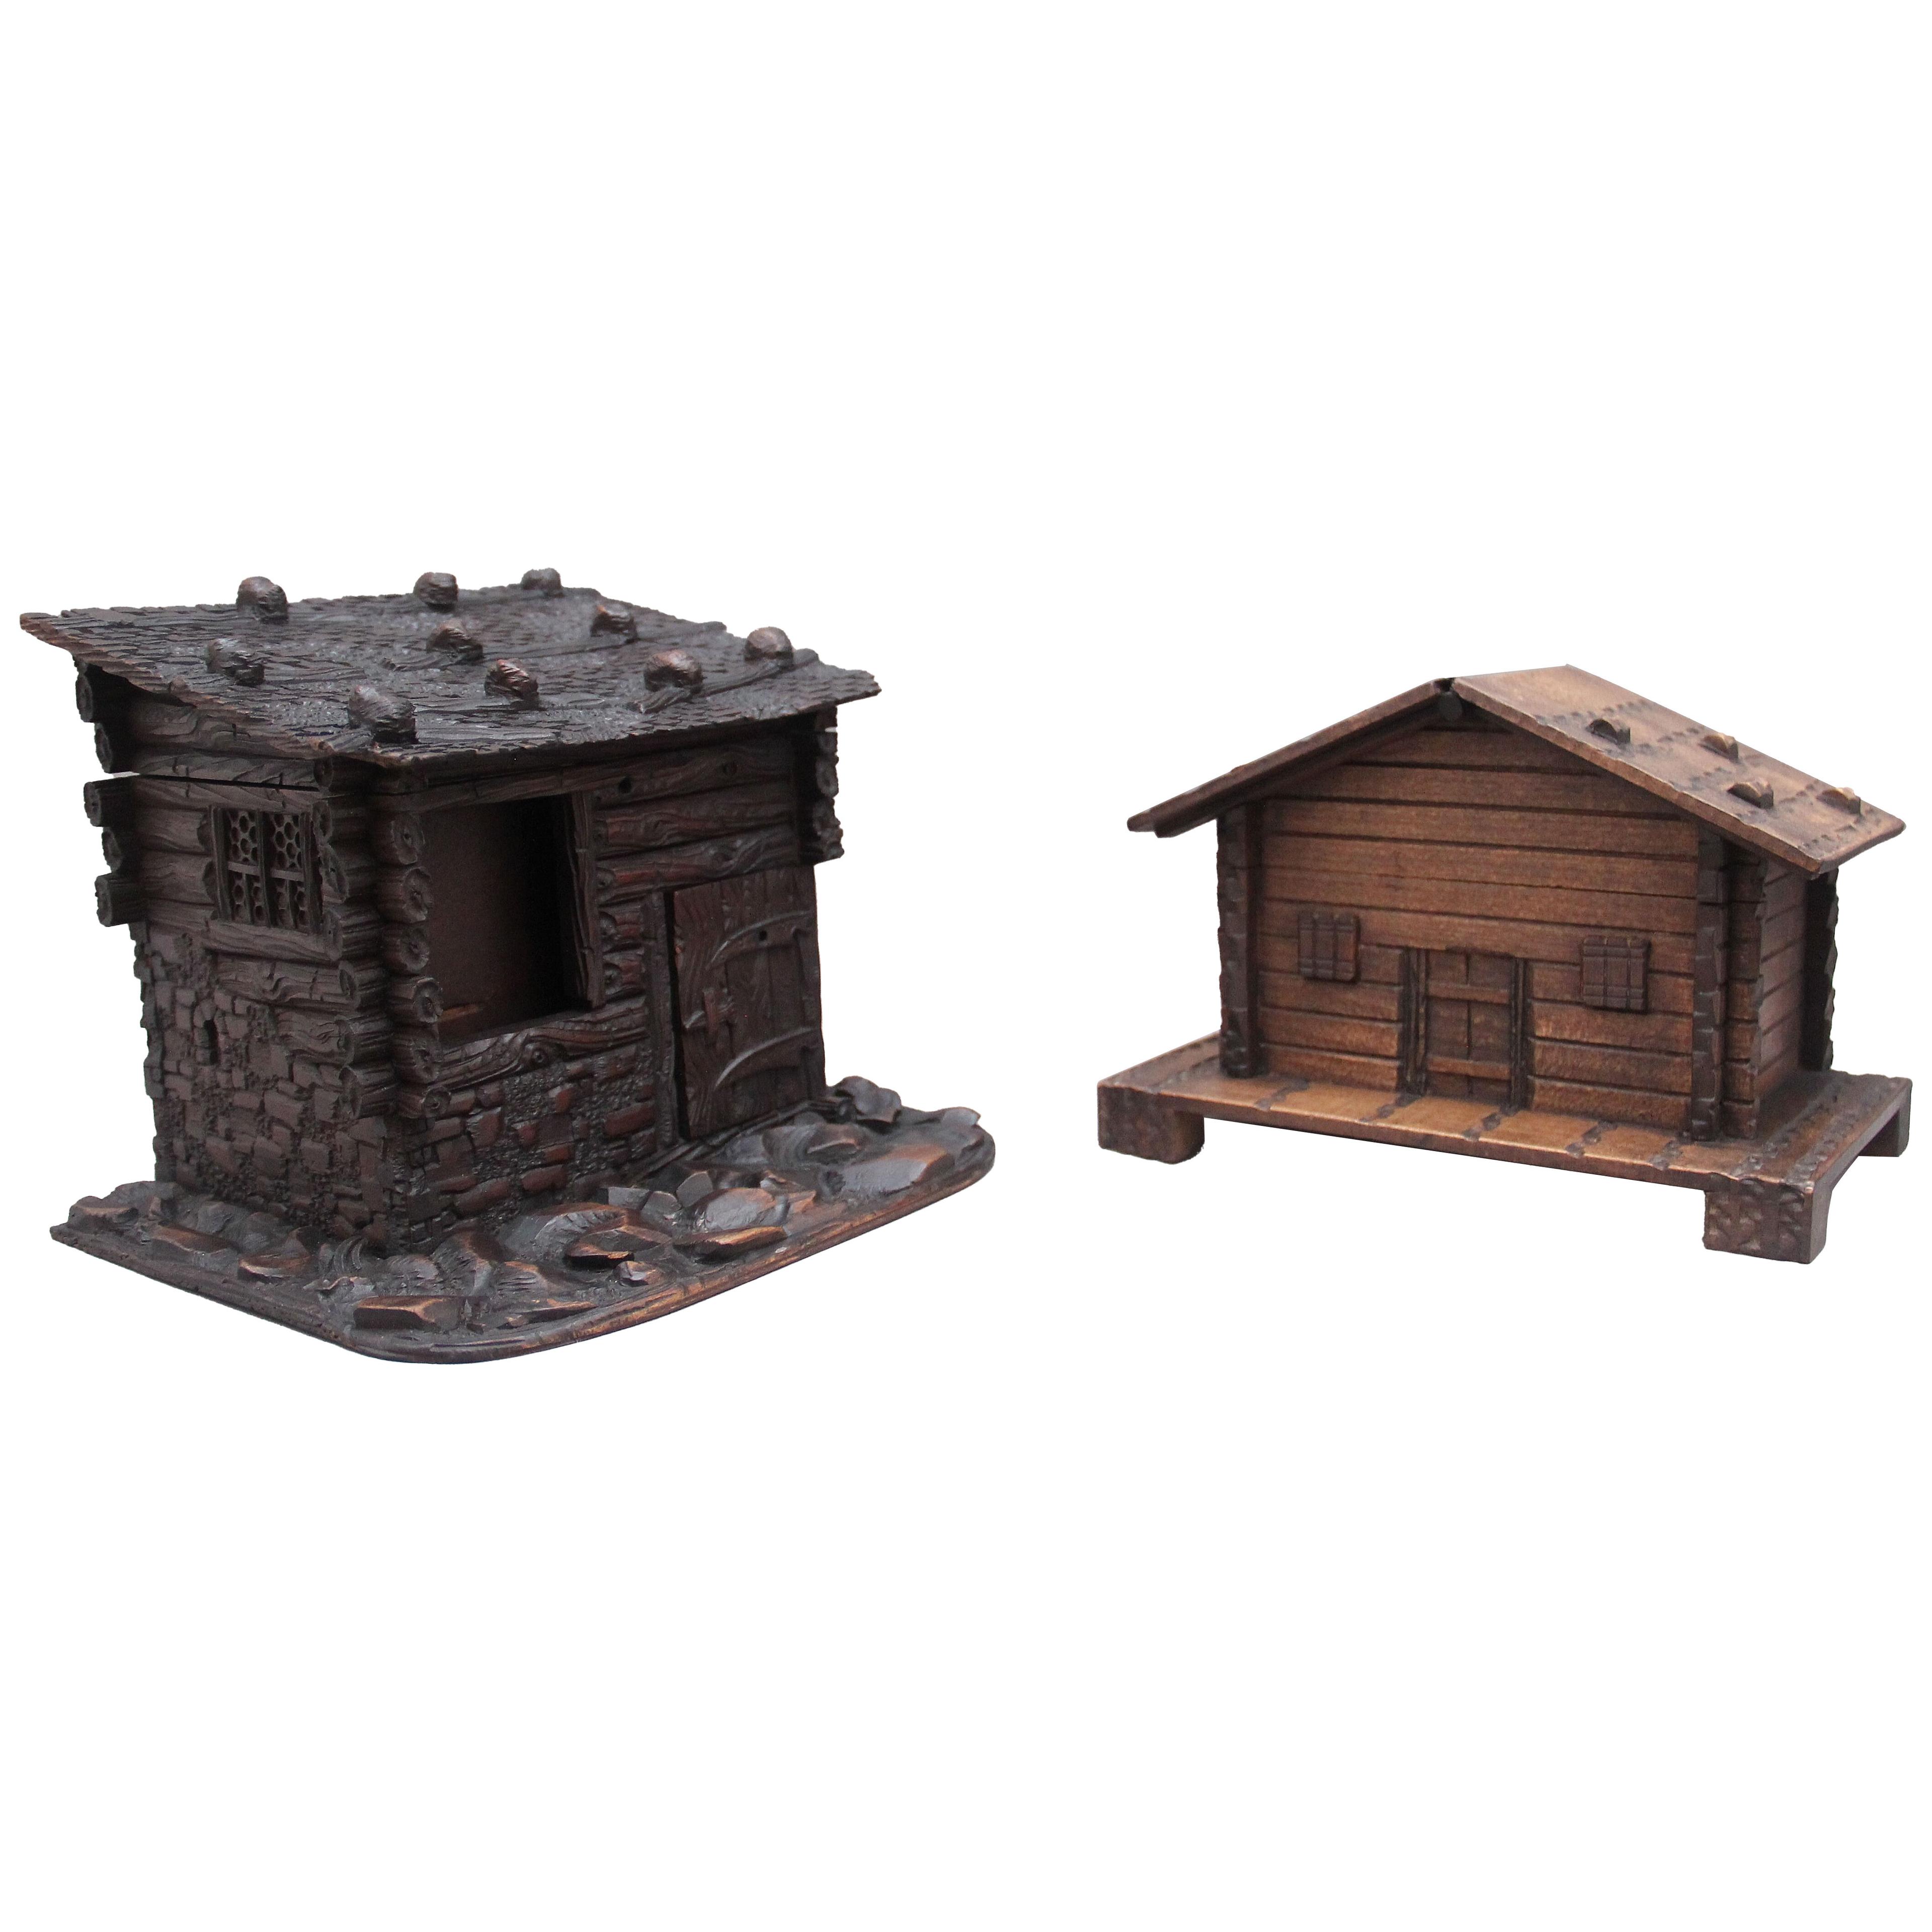 Two decorative 19th Century black forest cottages